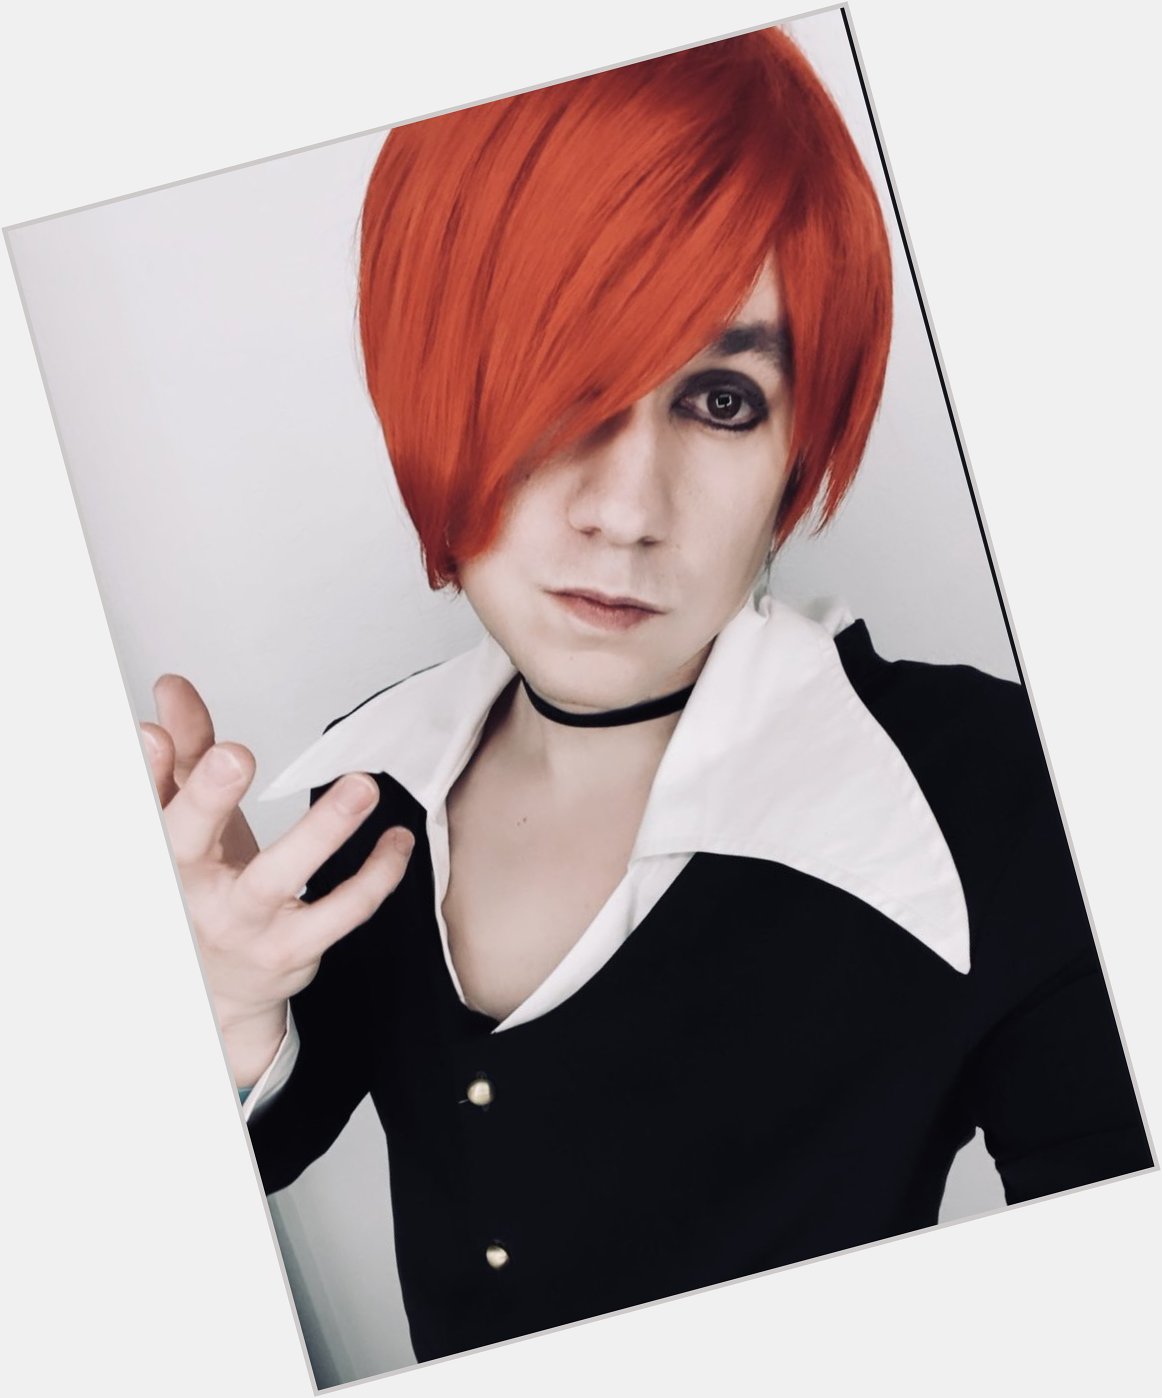 I know its 2 days late but happy belated birthday to my KOF main Iori Yagami!!

Cos by 